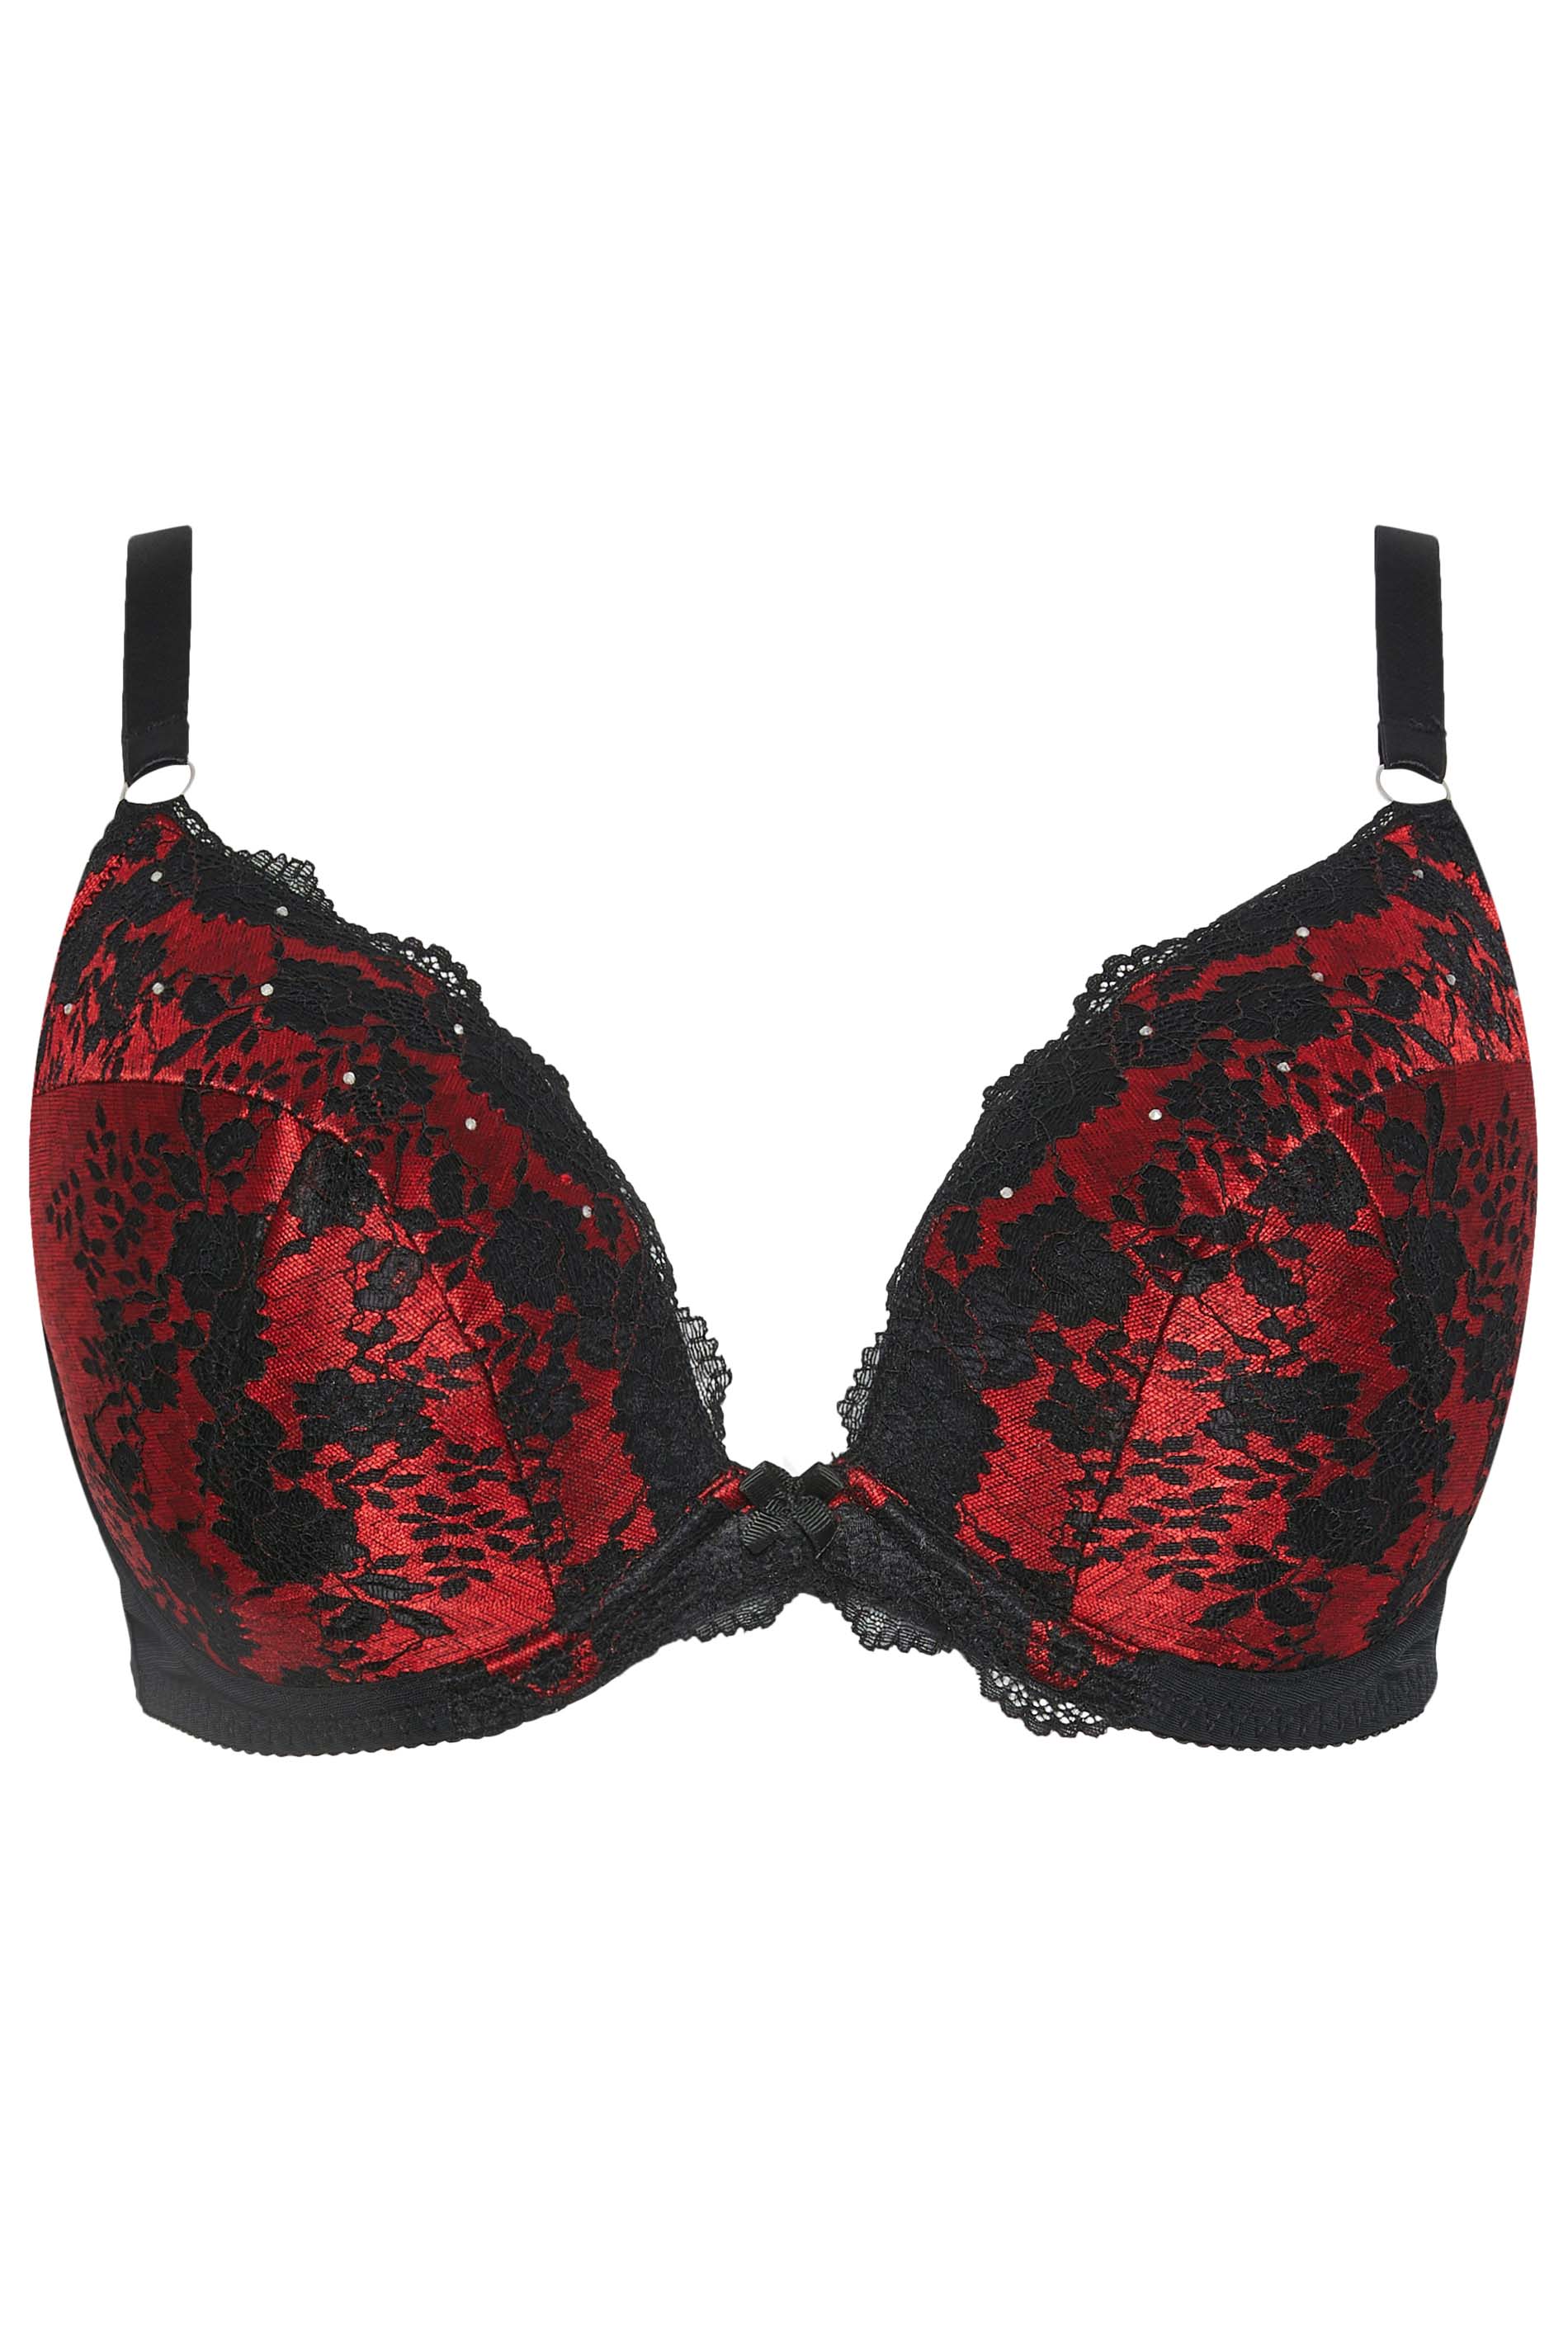 BLACK And RED LACE BRA ADJUSTABLE RED STRSPS SIZE 36C, push up padded